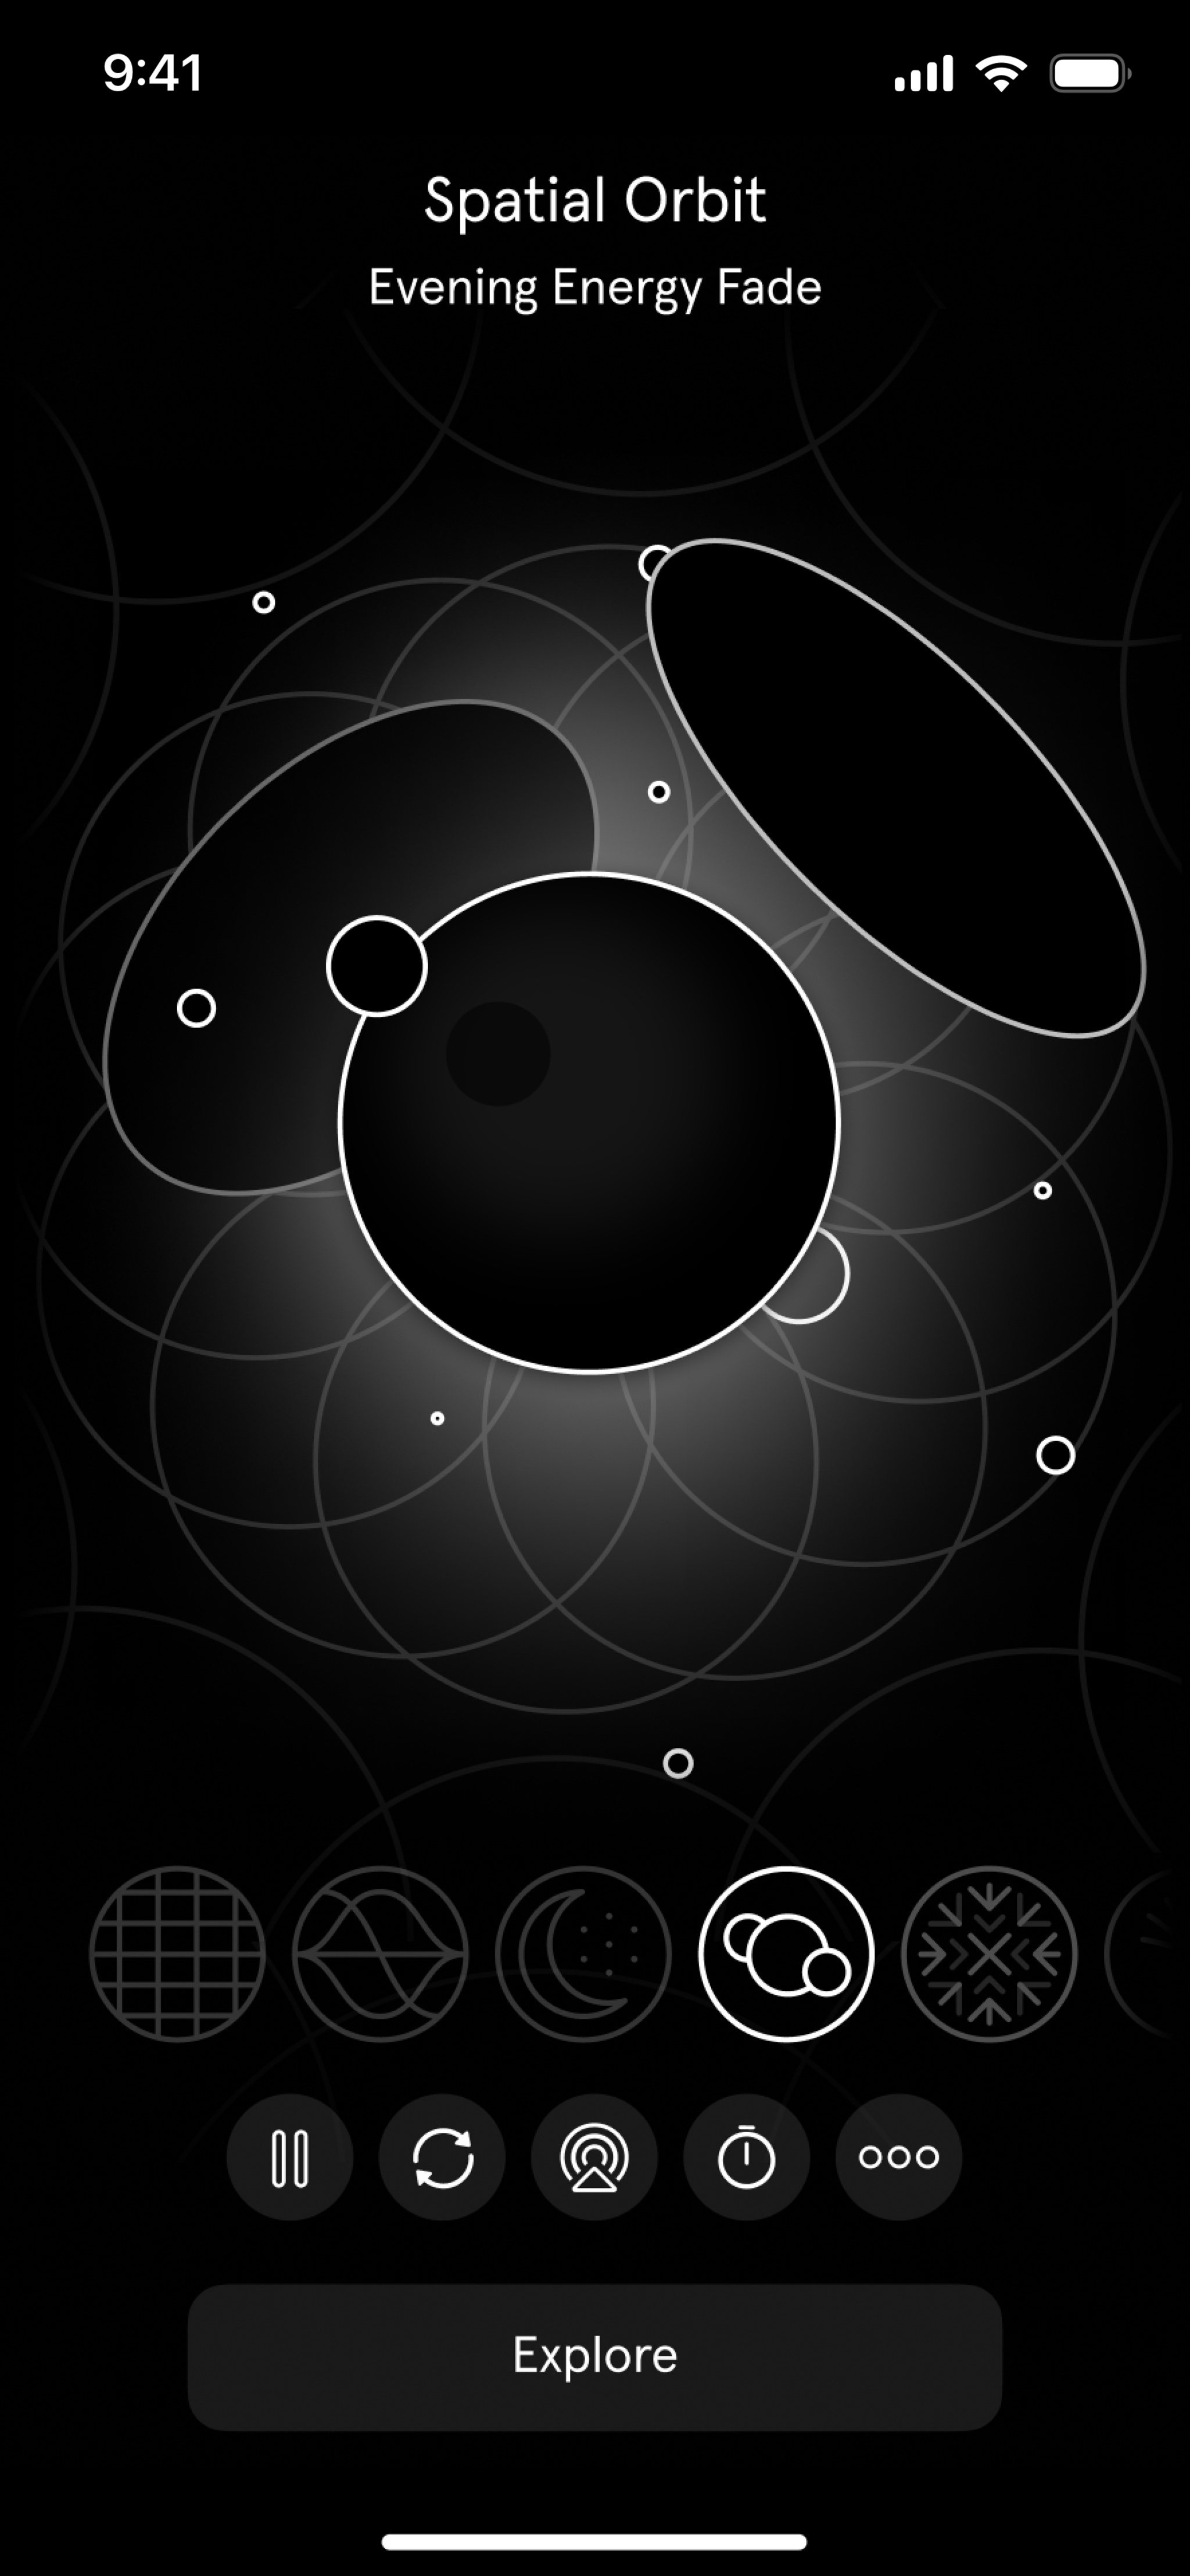 A screenshot of the Spatial Orbit soundscape in the immersive sound app *Endel*, showing a series of abstract black circles on a mostly black background. 